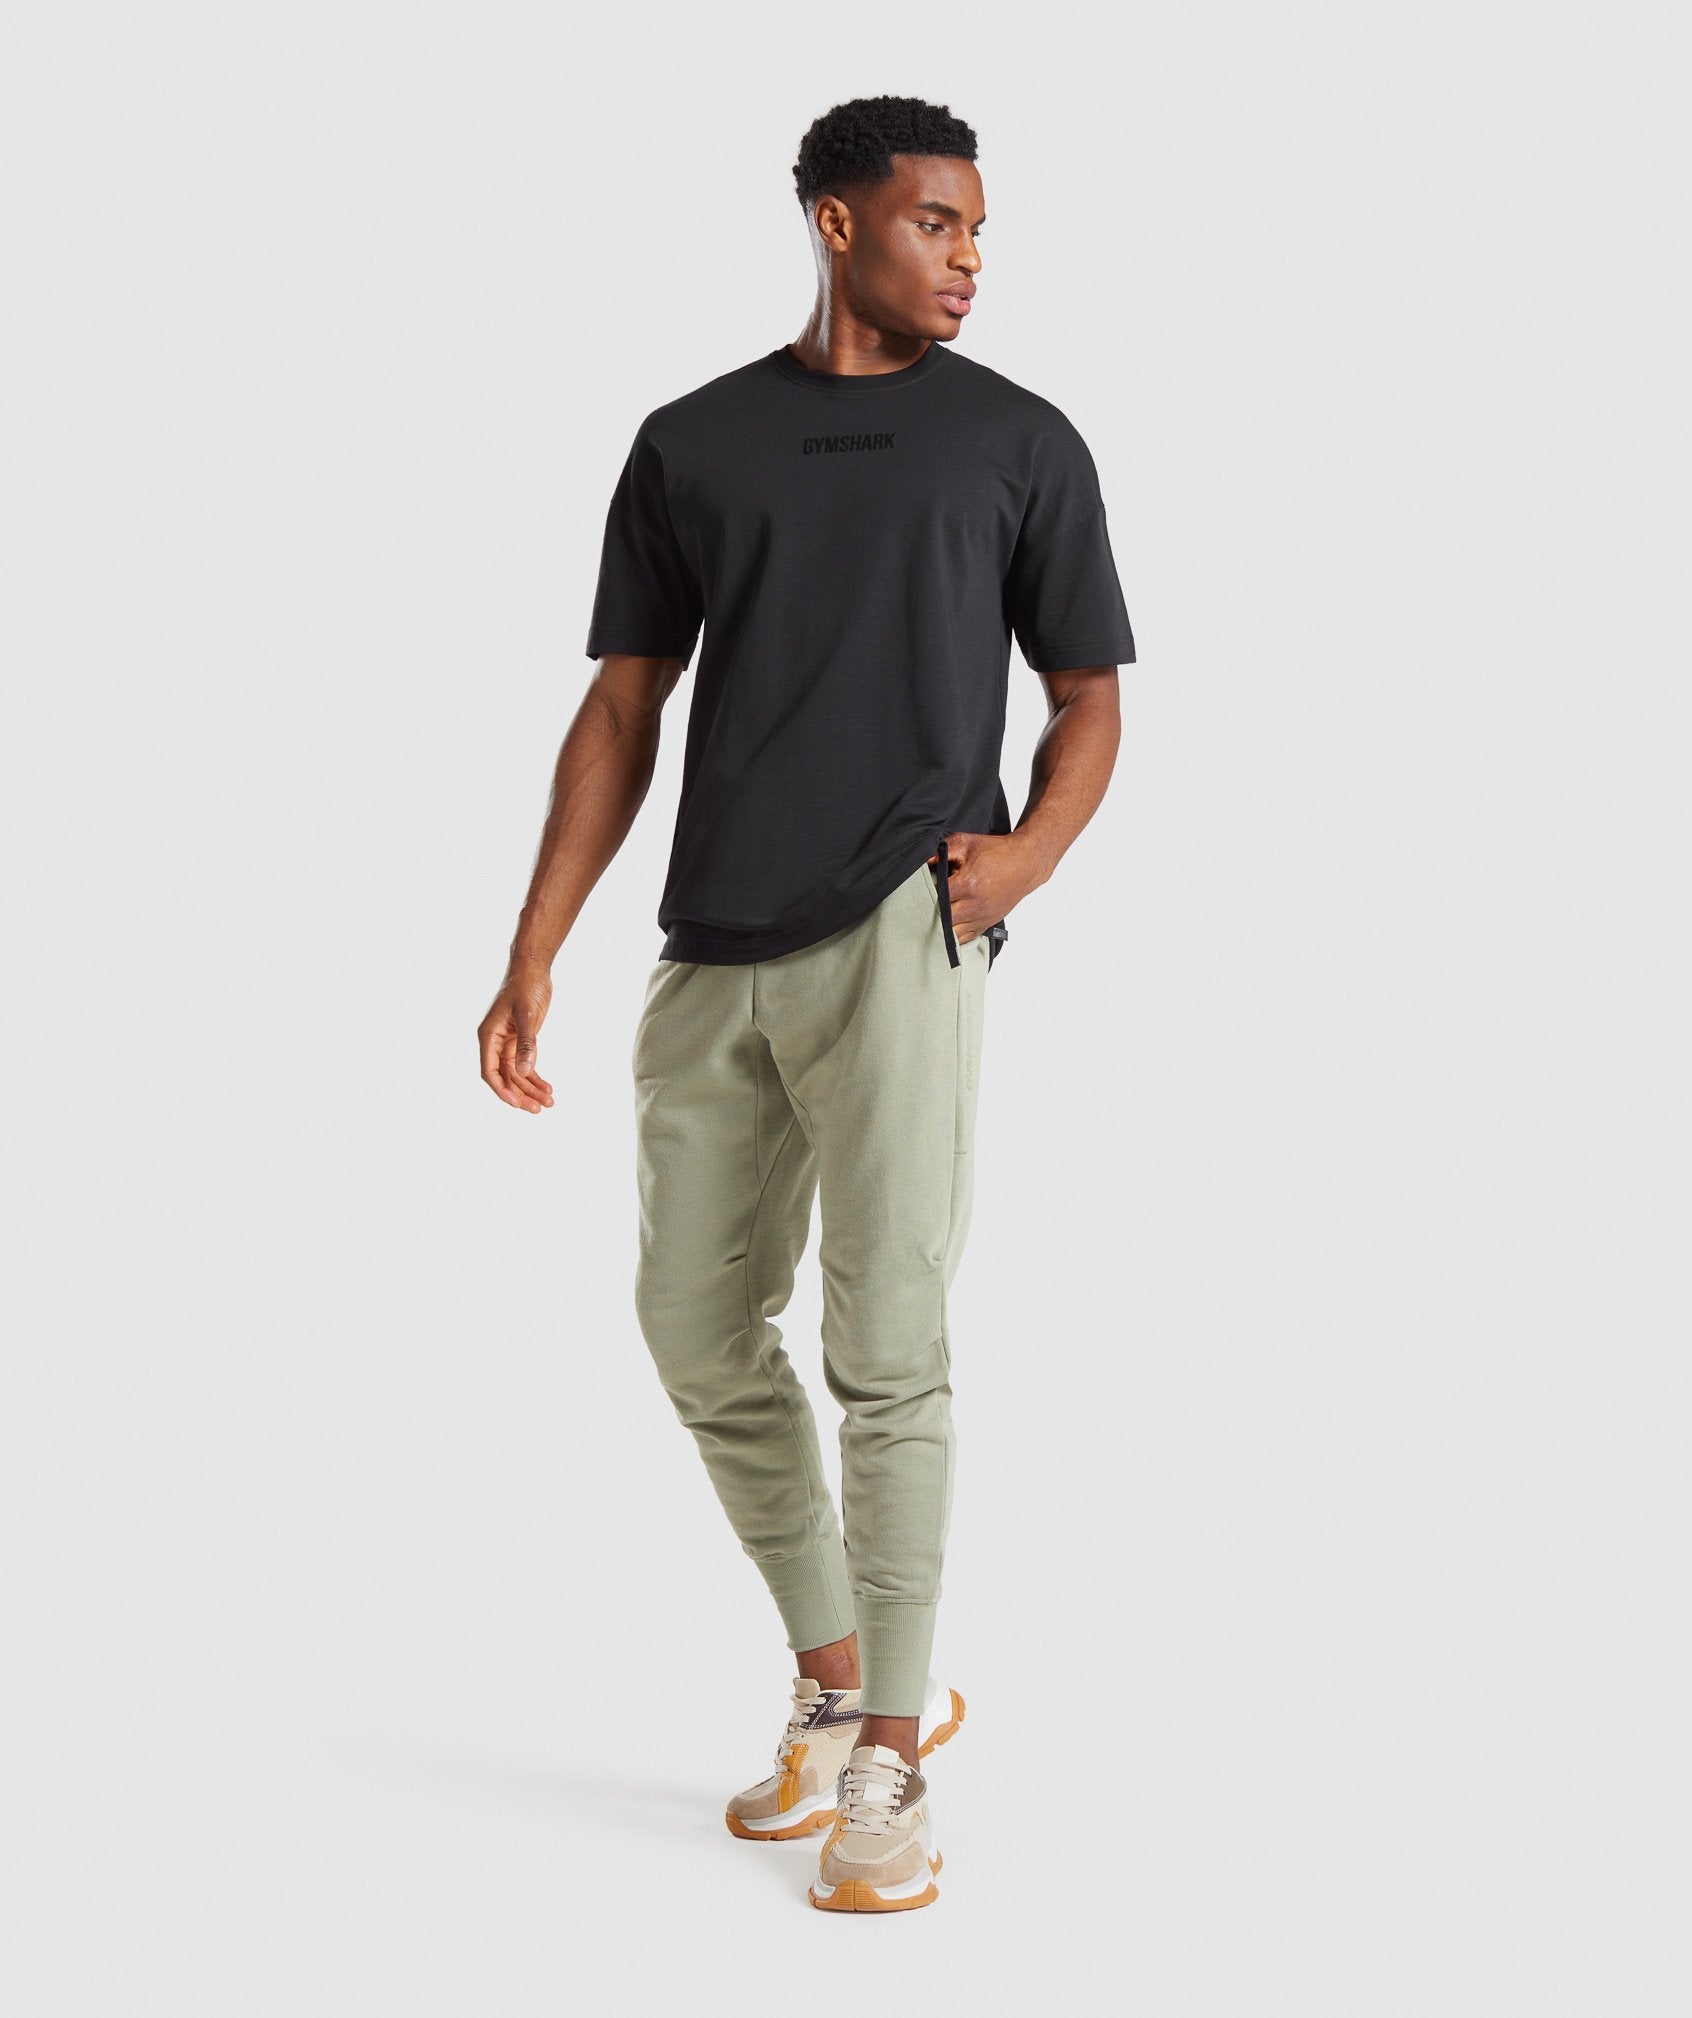 Restore Joggers in Light Green - view 5